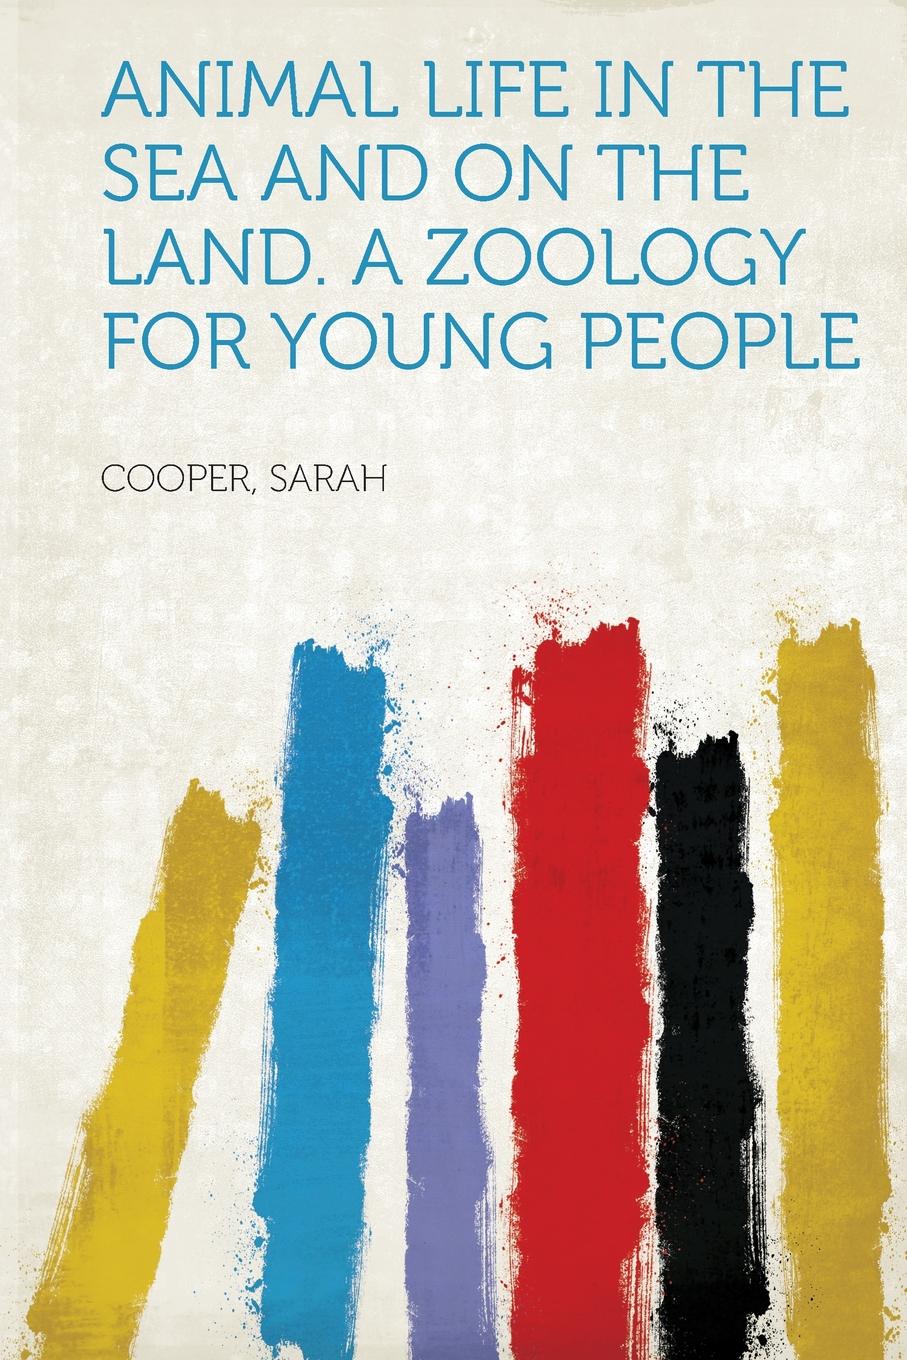 Animal Life in the Sea and on the Land. A Zoology for Young People